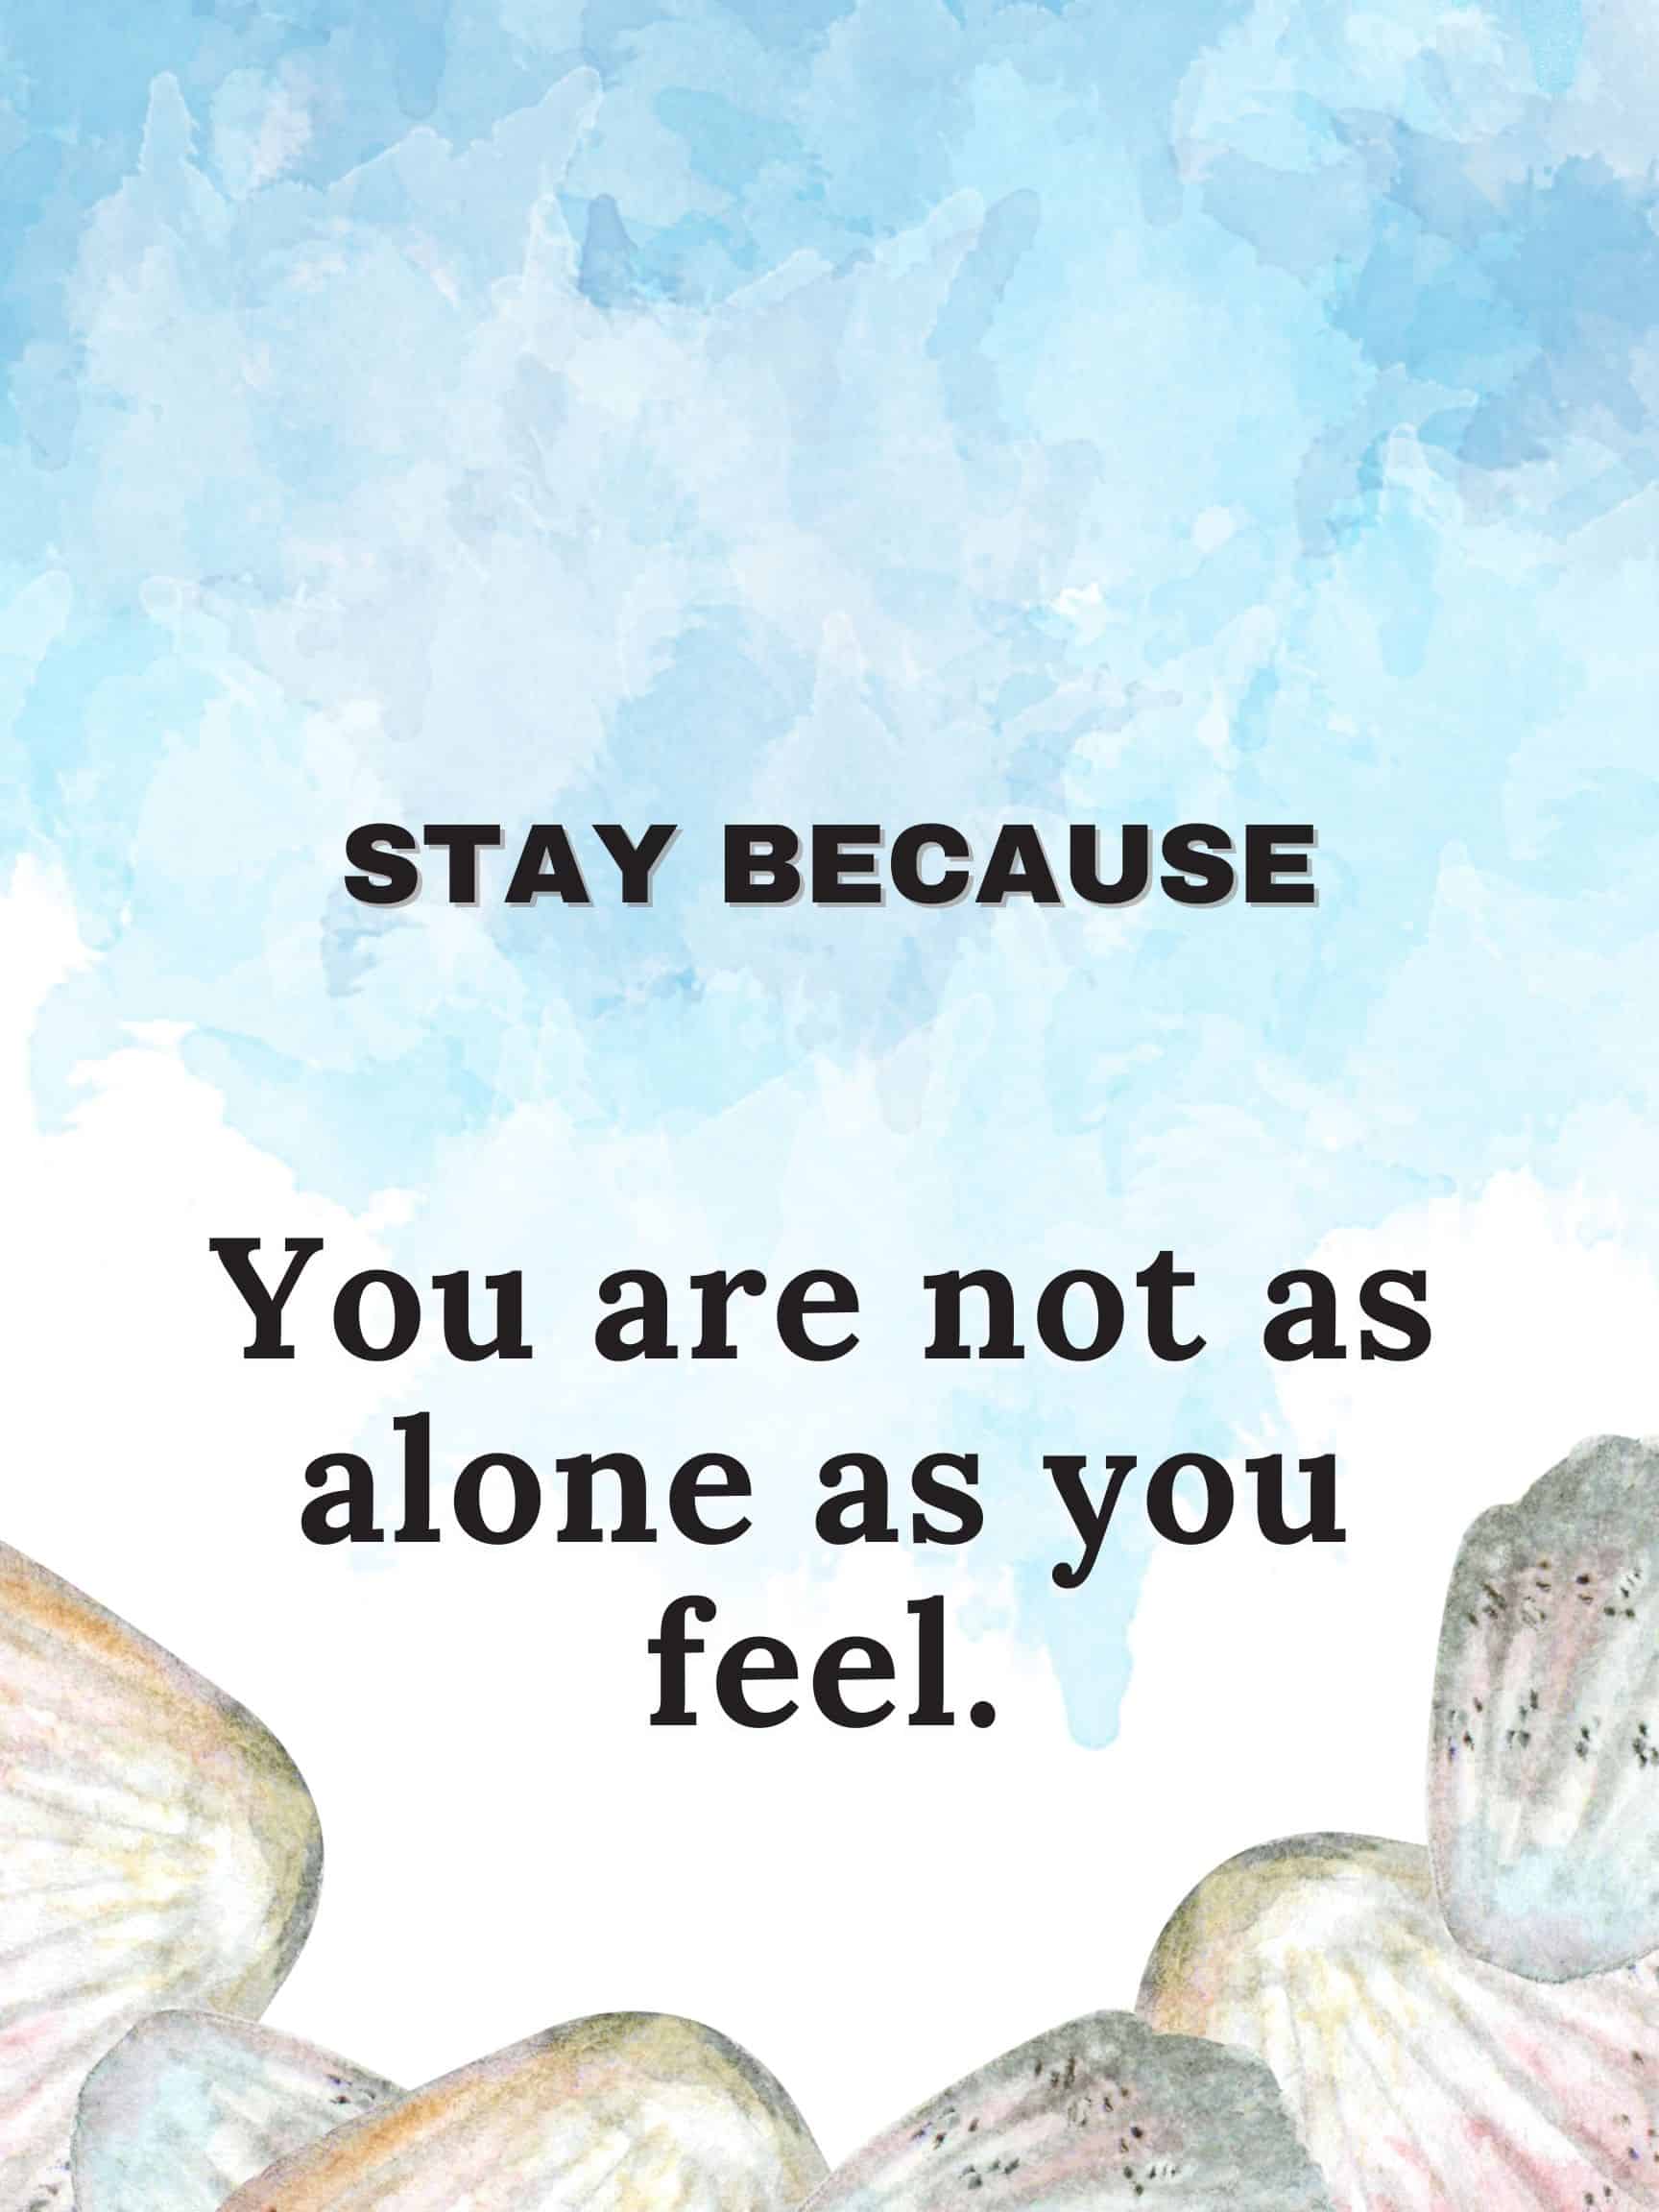 Stay because you are not as alone as you feel #stayBecause